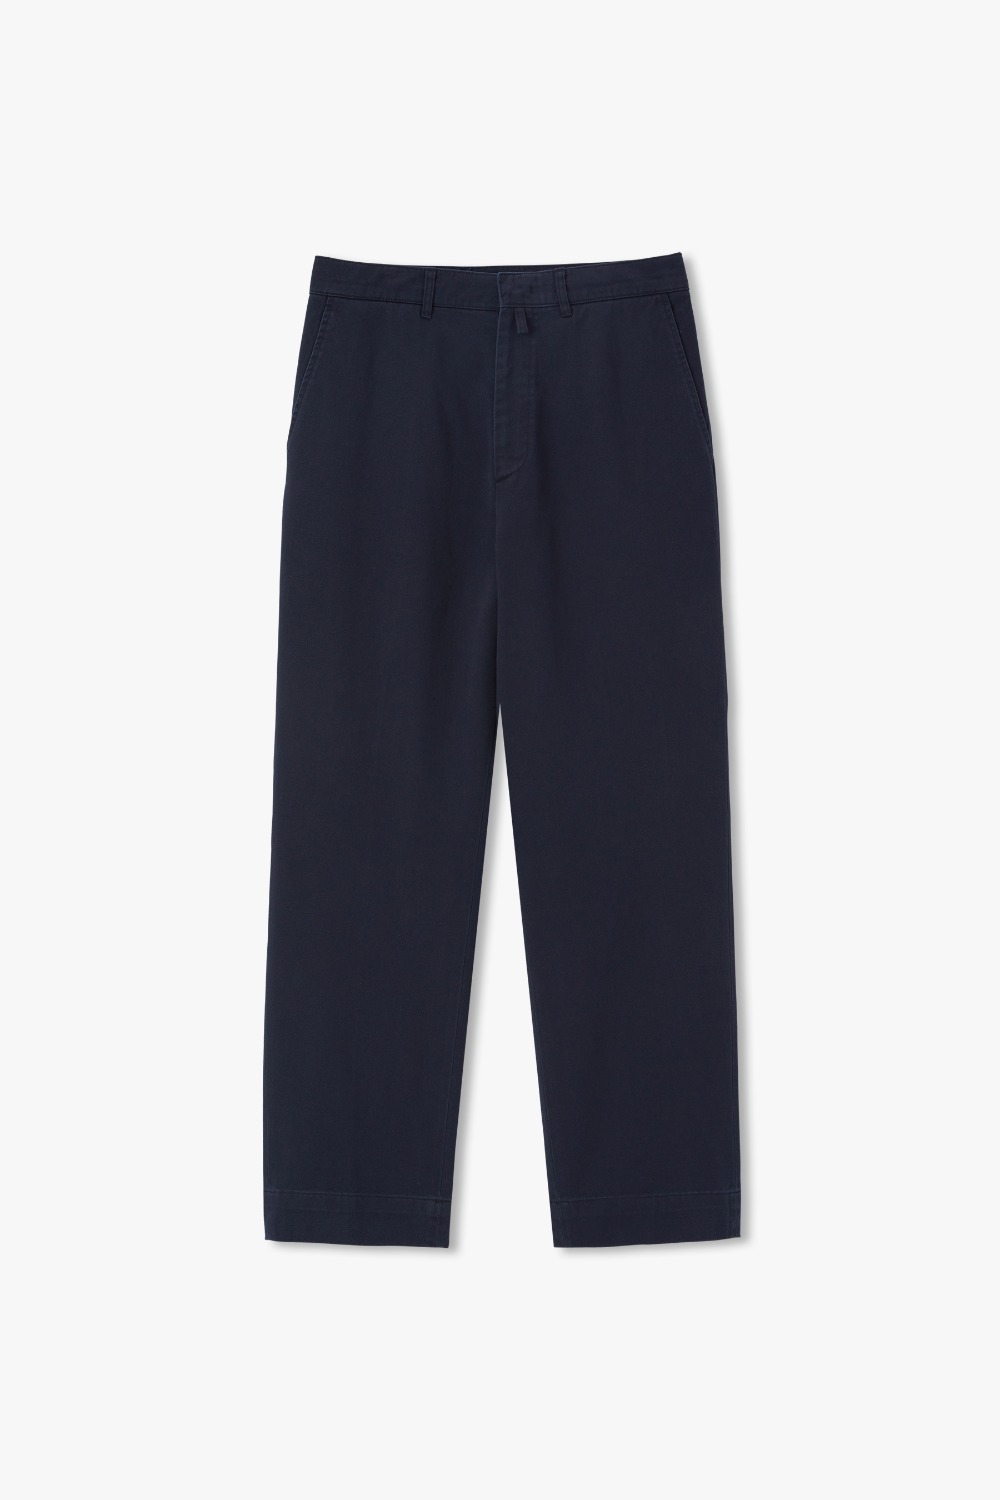 WASHED NAVY R-801 STRAIGHT COTTON DRILL WASHED CHINO PANTS (ECP GARMENT PROCESS)